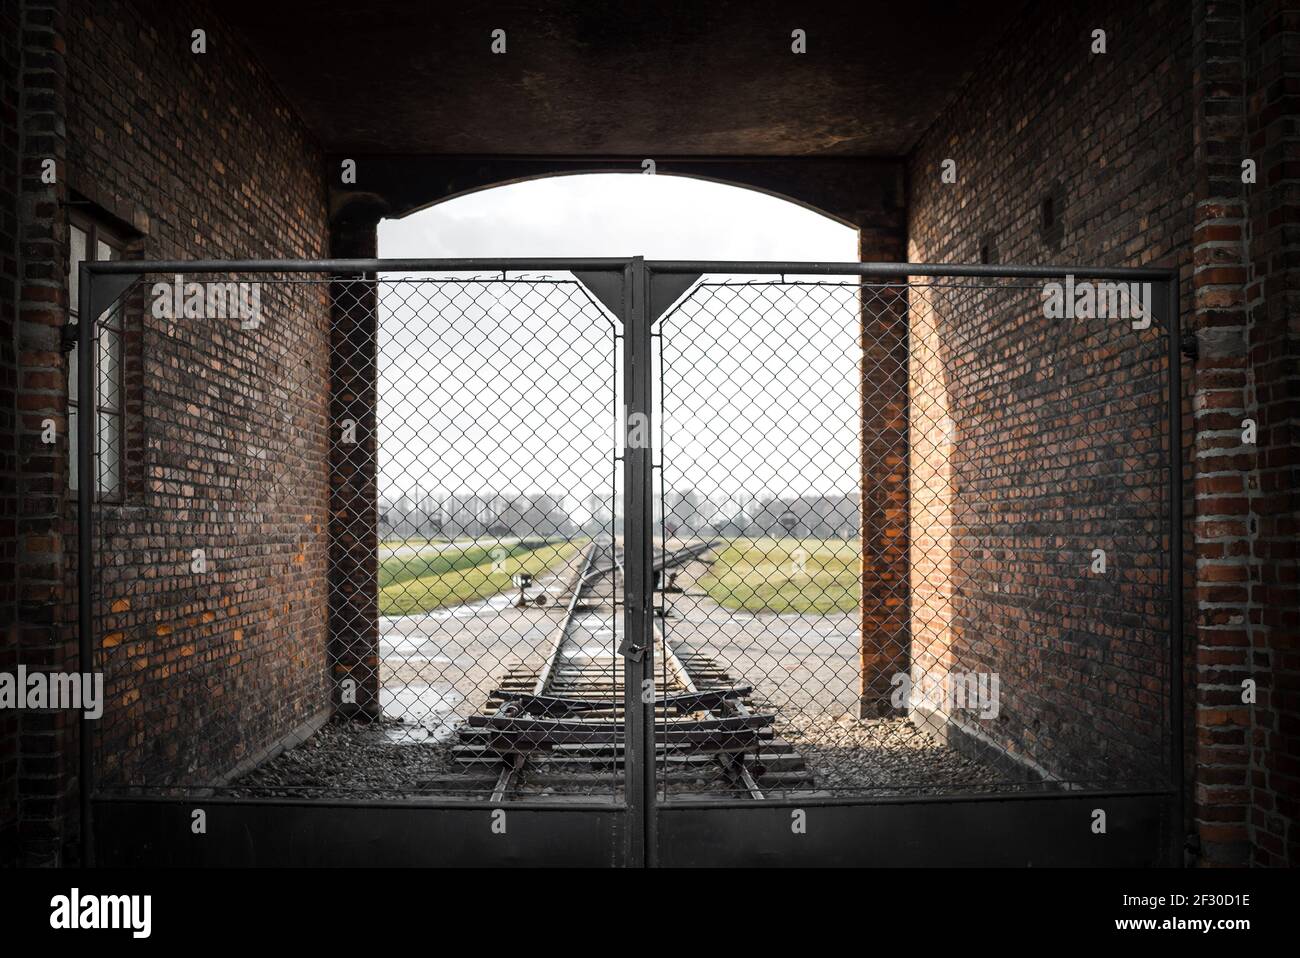 Auschwitz Birkenau II Concentration Extermination Camp Oswiecim Poland guard tower over gatehouse train entrance no people gate locked looking through Stock Photo